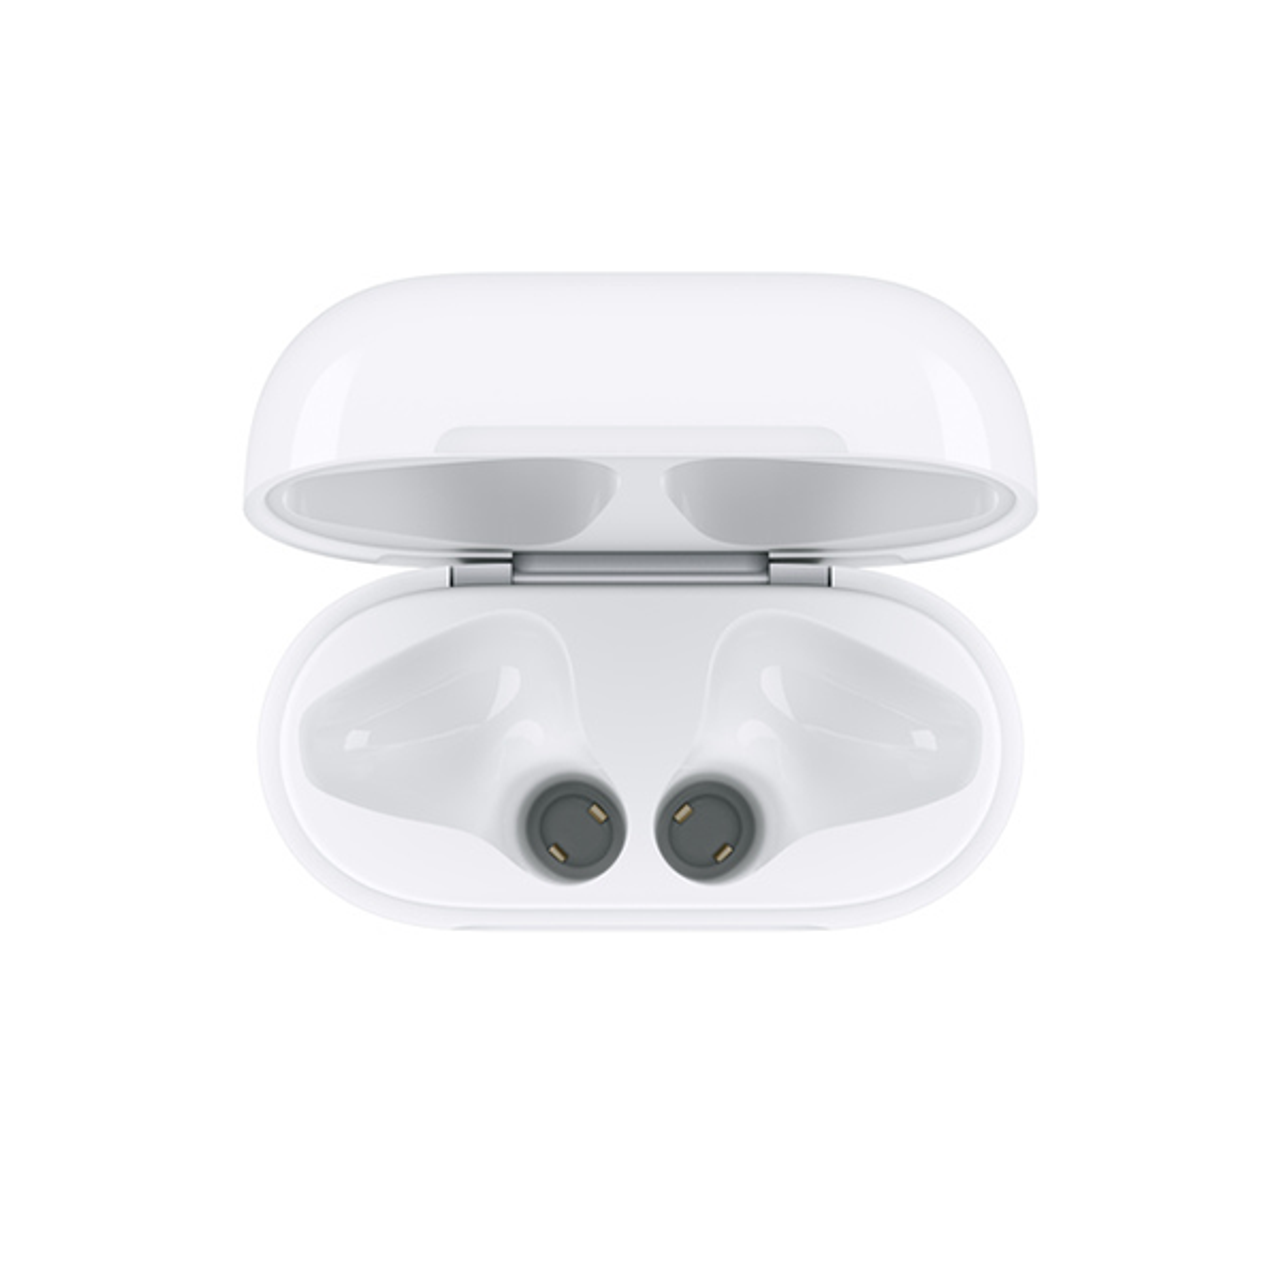 Apple Wireless White Charging Case for AirPods product image